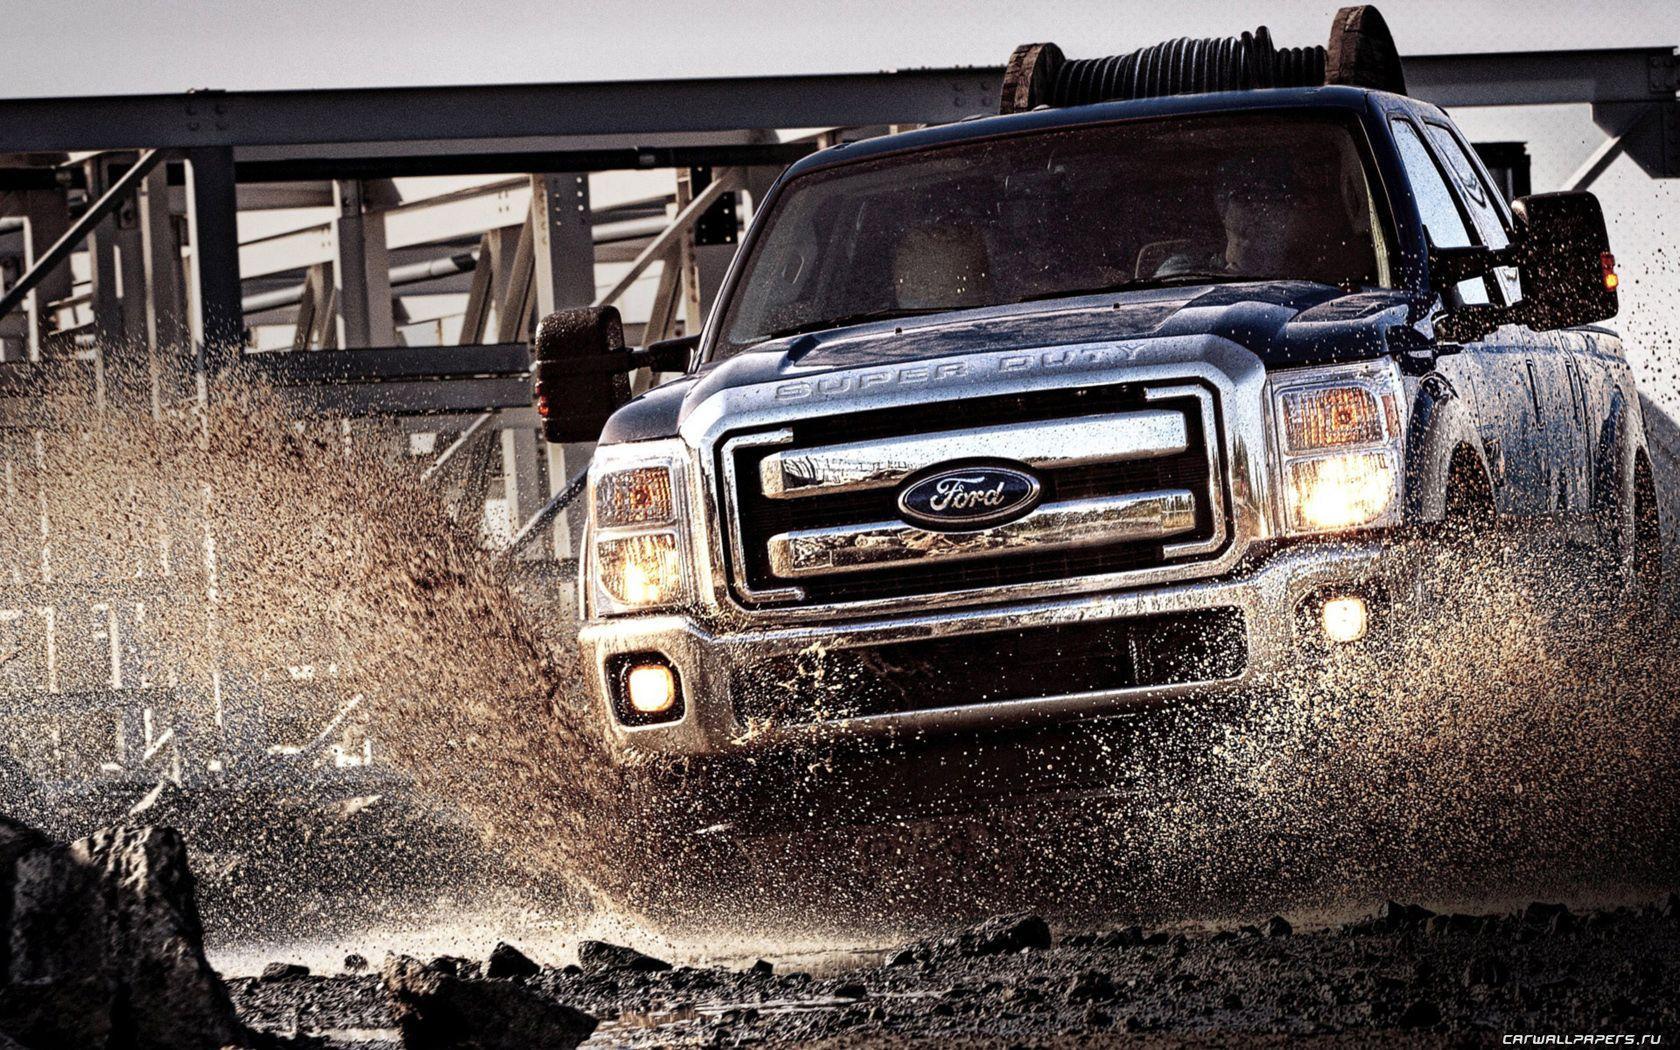 Ford Super Duty Wallpapers Top Free Ford Super Duty Backgrounds Wallpaperaccess